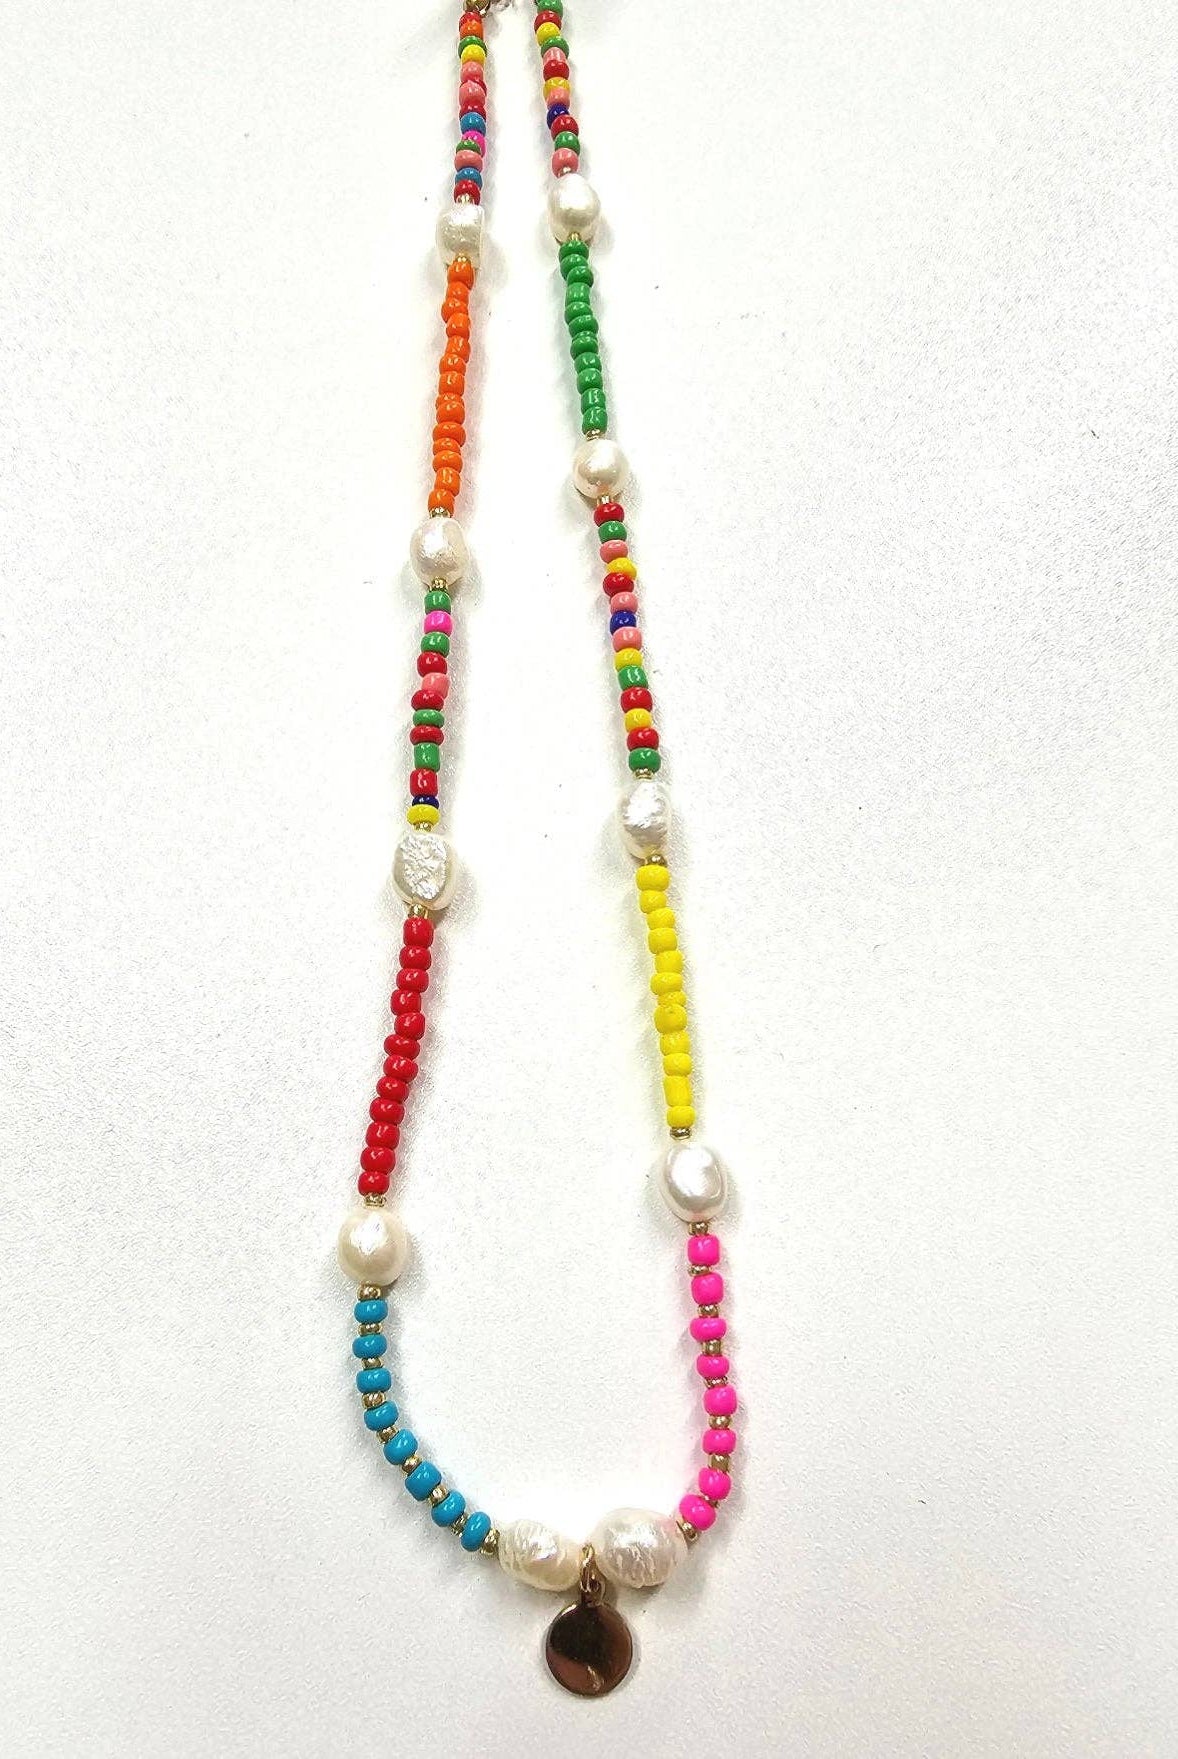 Multi-color beaded necklace | Stuffology Boutique-Necklaces-Pink Panache Brands-Stuffology - Where Vintage Meets Modern, A Boutique for Real Women in Crosbyton, TX